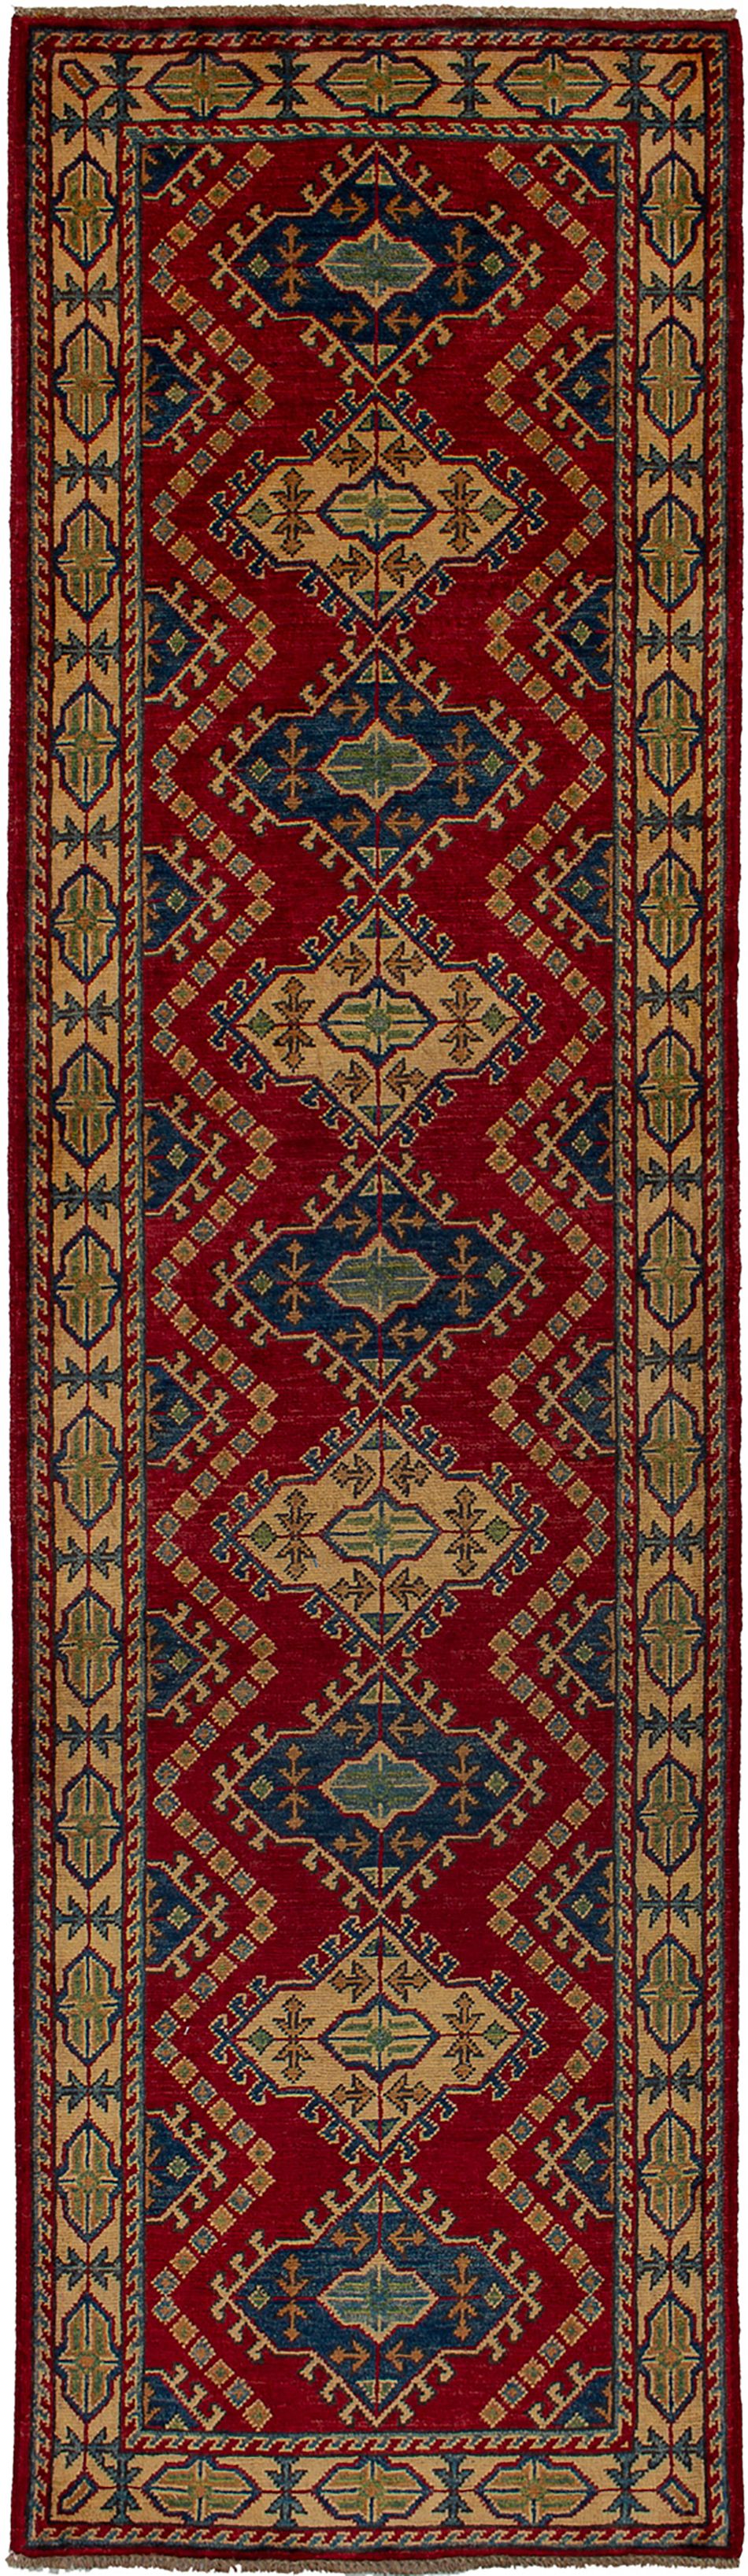 Hand-knotted Finest Gazni Red Wool Rug 2'8" x 9'7"  Size: 2'8" x 9'7"  